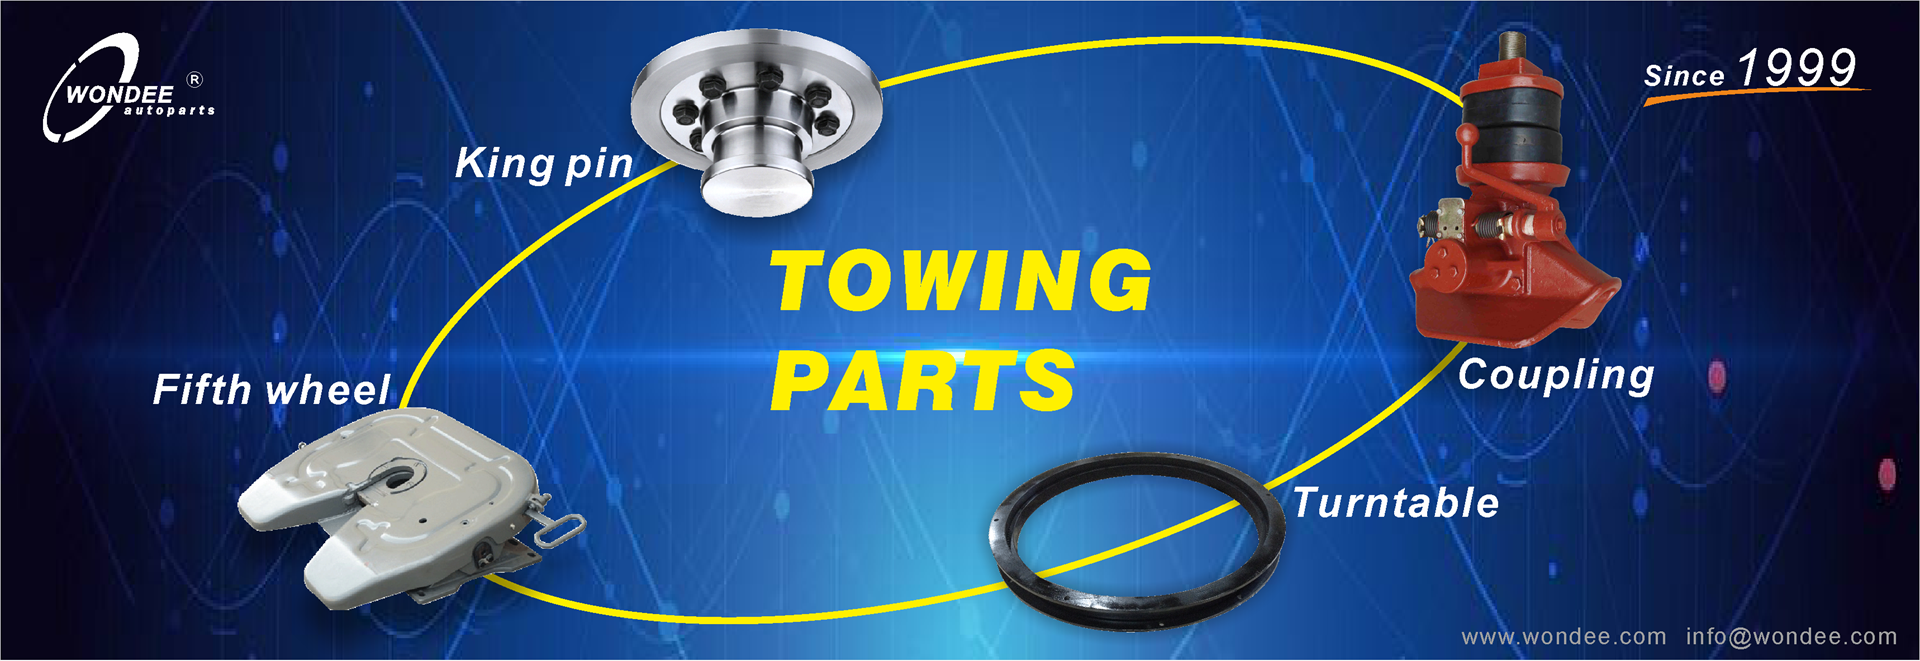 Wondee towing parts